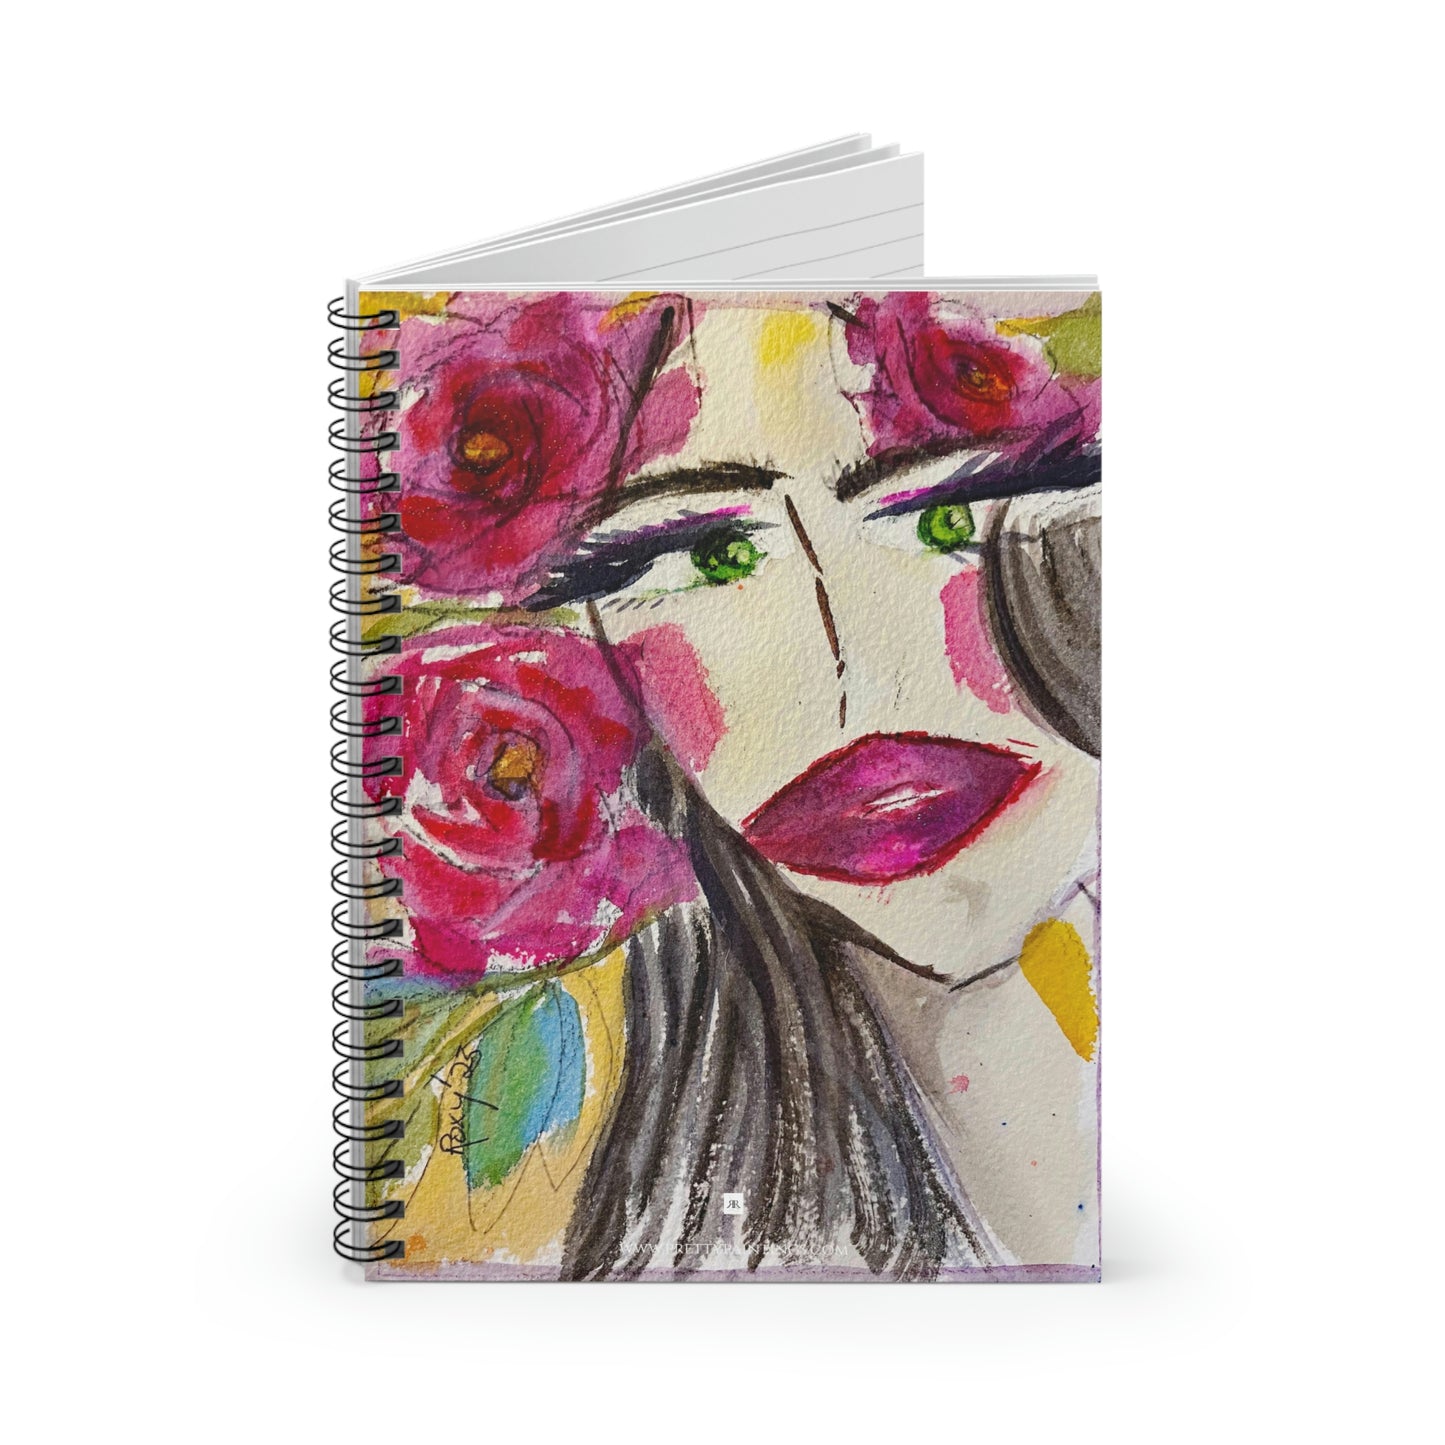 Brunette with Roses "Uh huh" Spiral Notebook